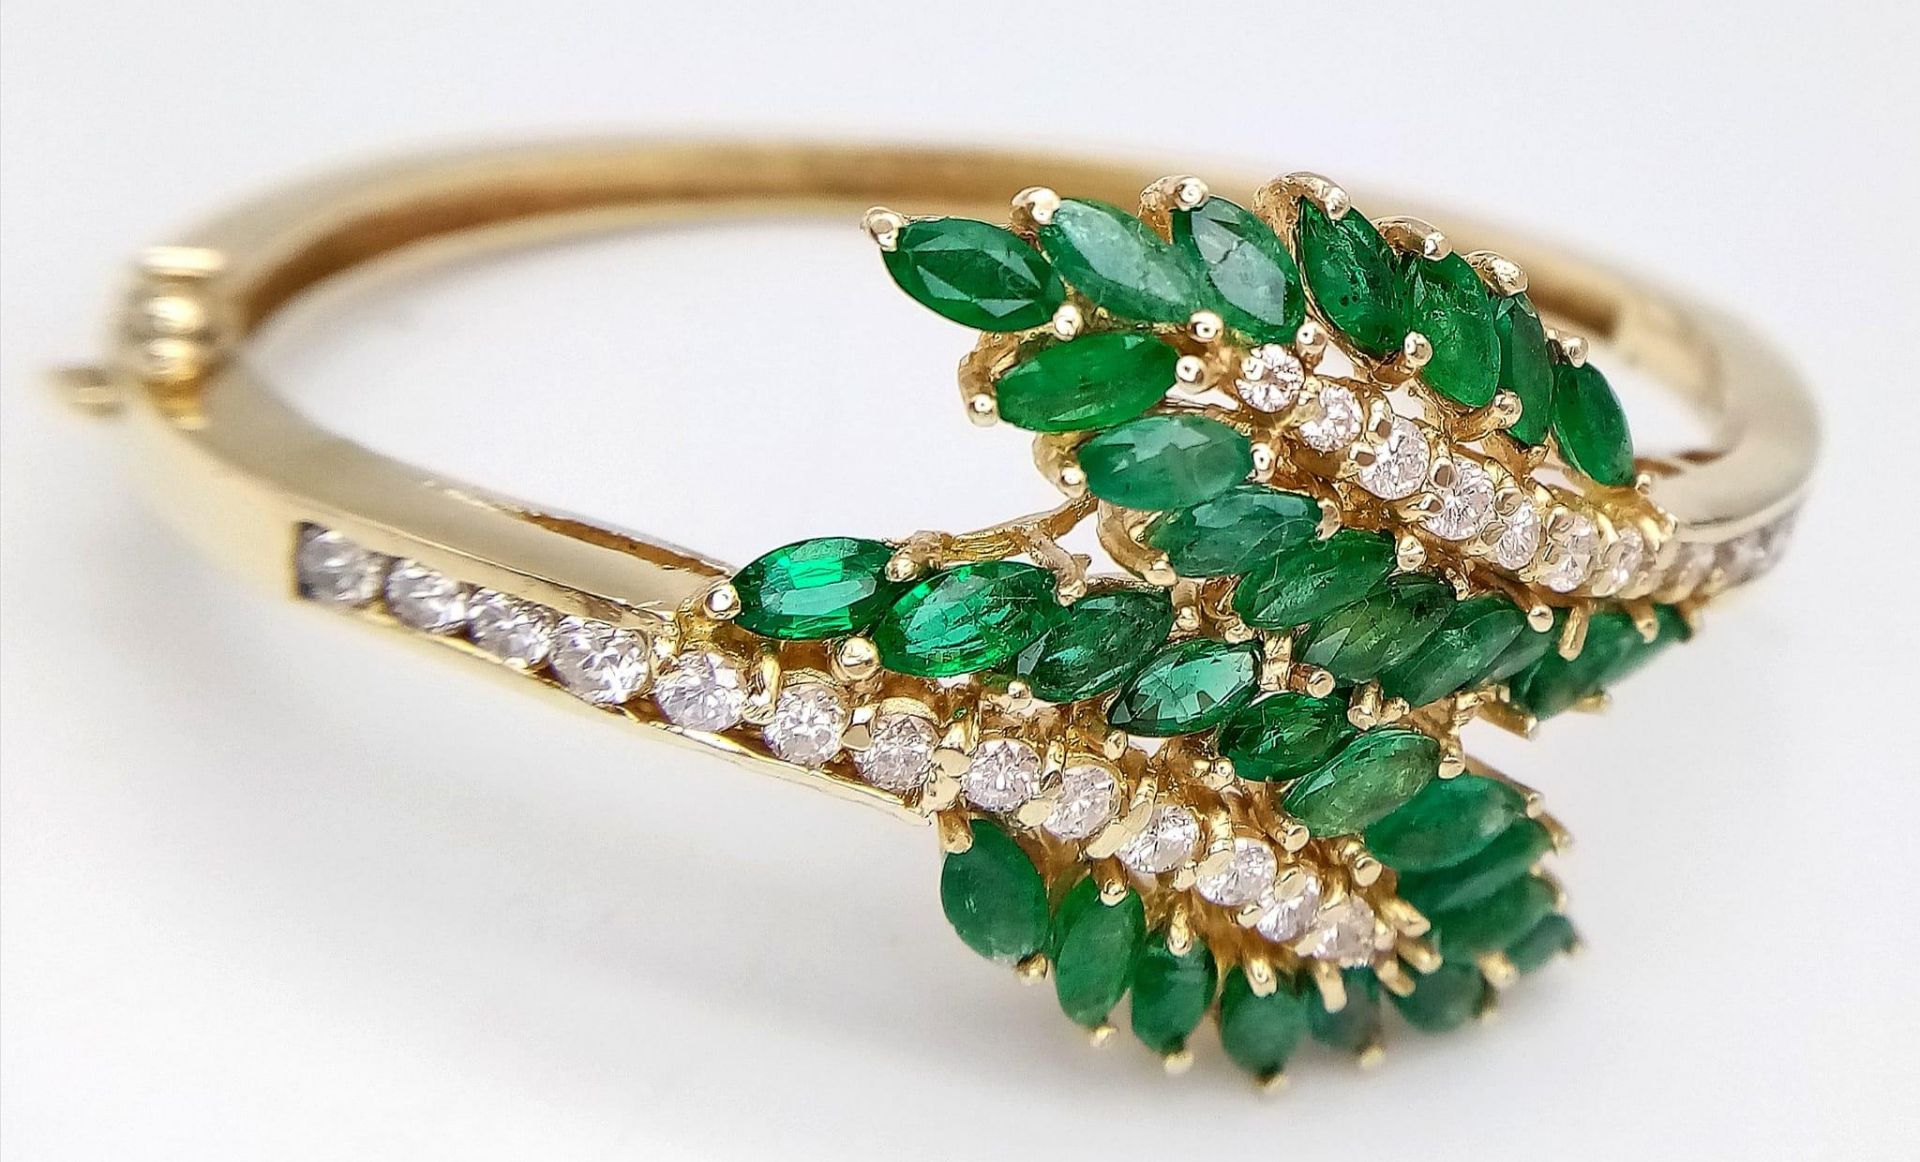 A DIAMOND AND EMERALD LEAF DESIGN BANGLE IN CROSSOVER STYLE SET IN18K GOLD . 33.5gms 10457 - Image 3 of 15